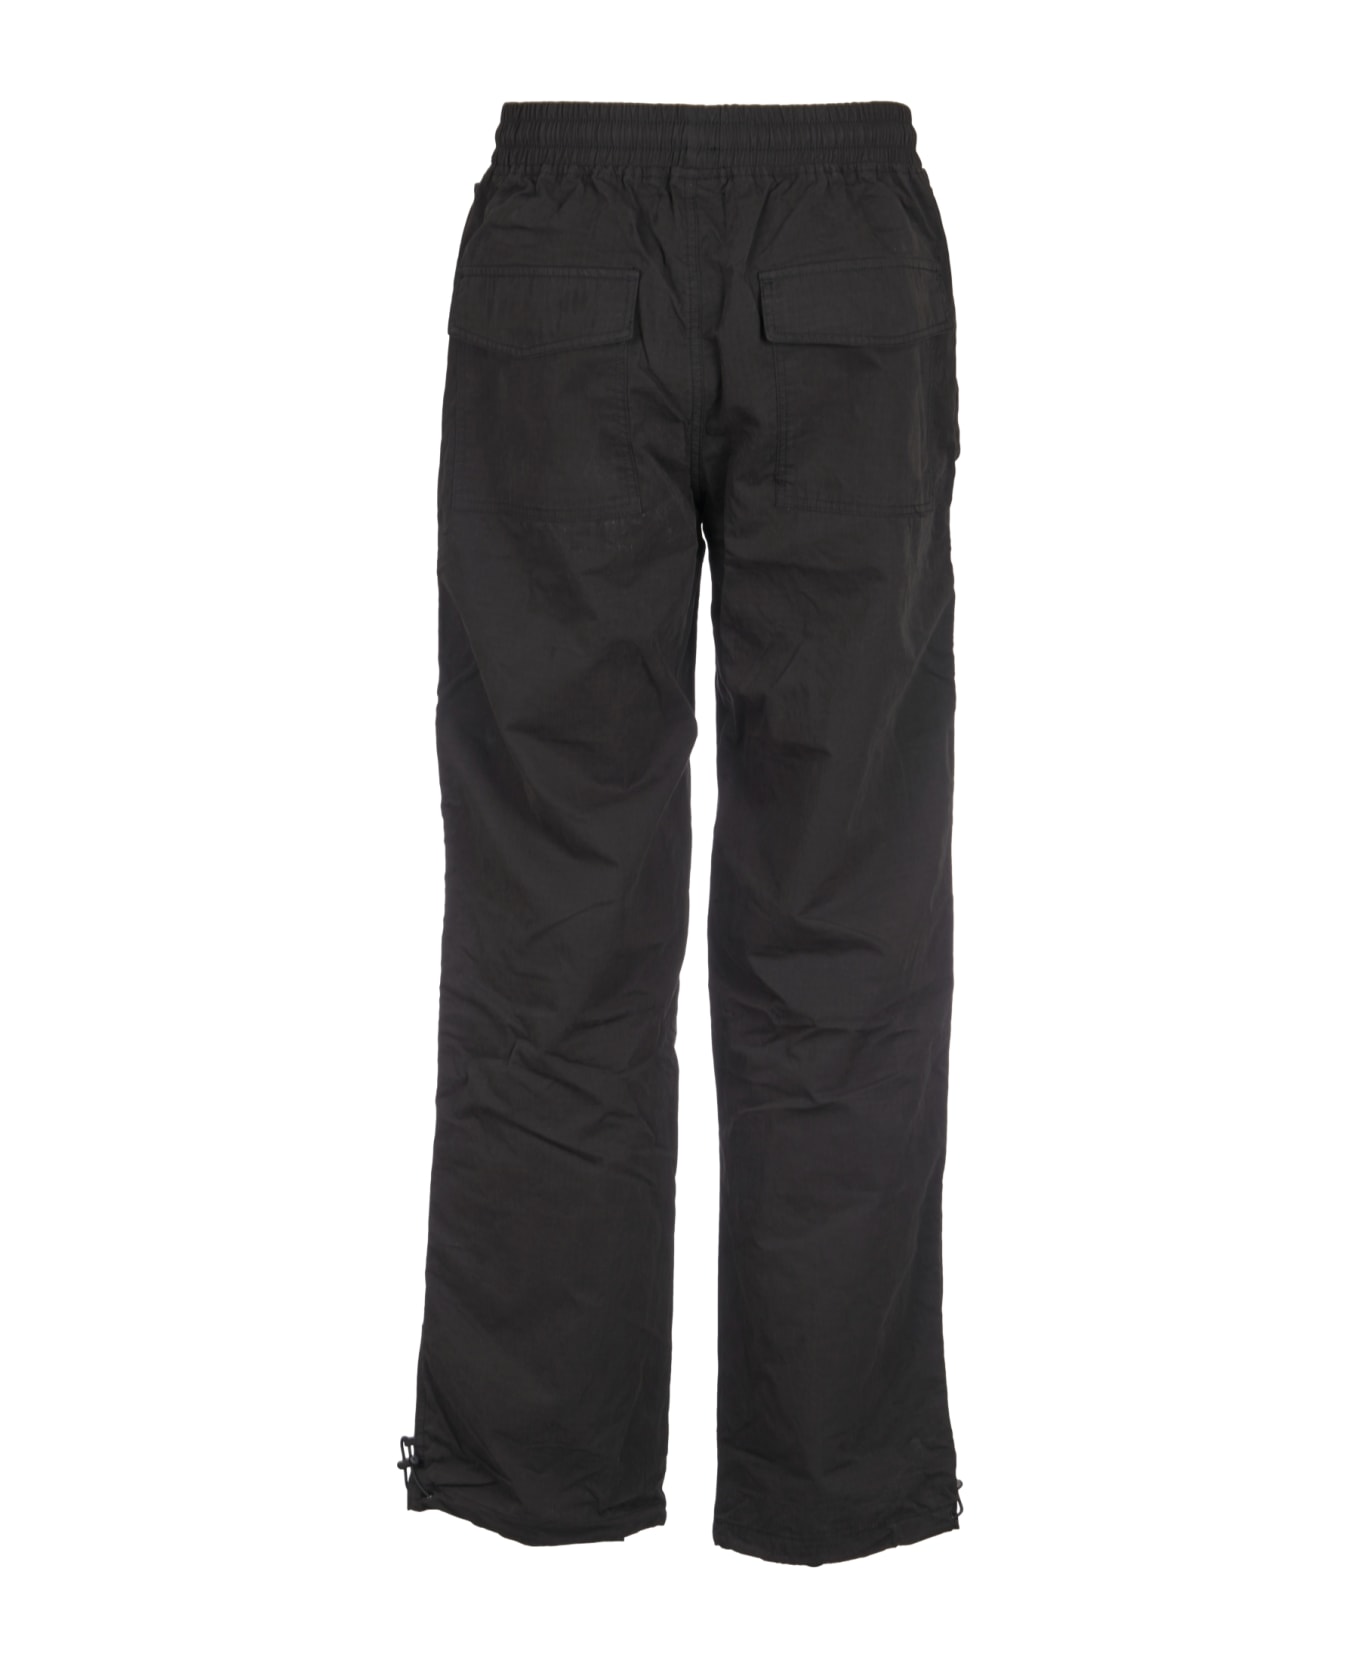 REPRESENT Buttoned Pocket Trousers - Black